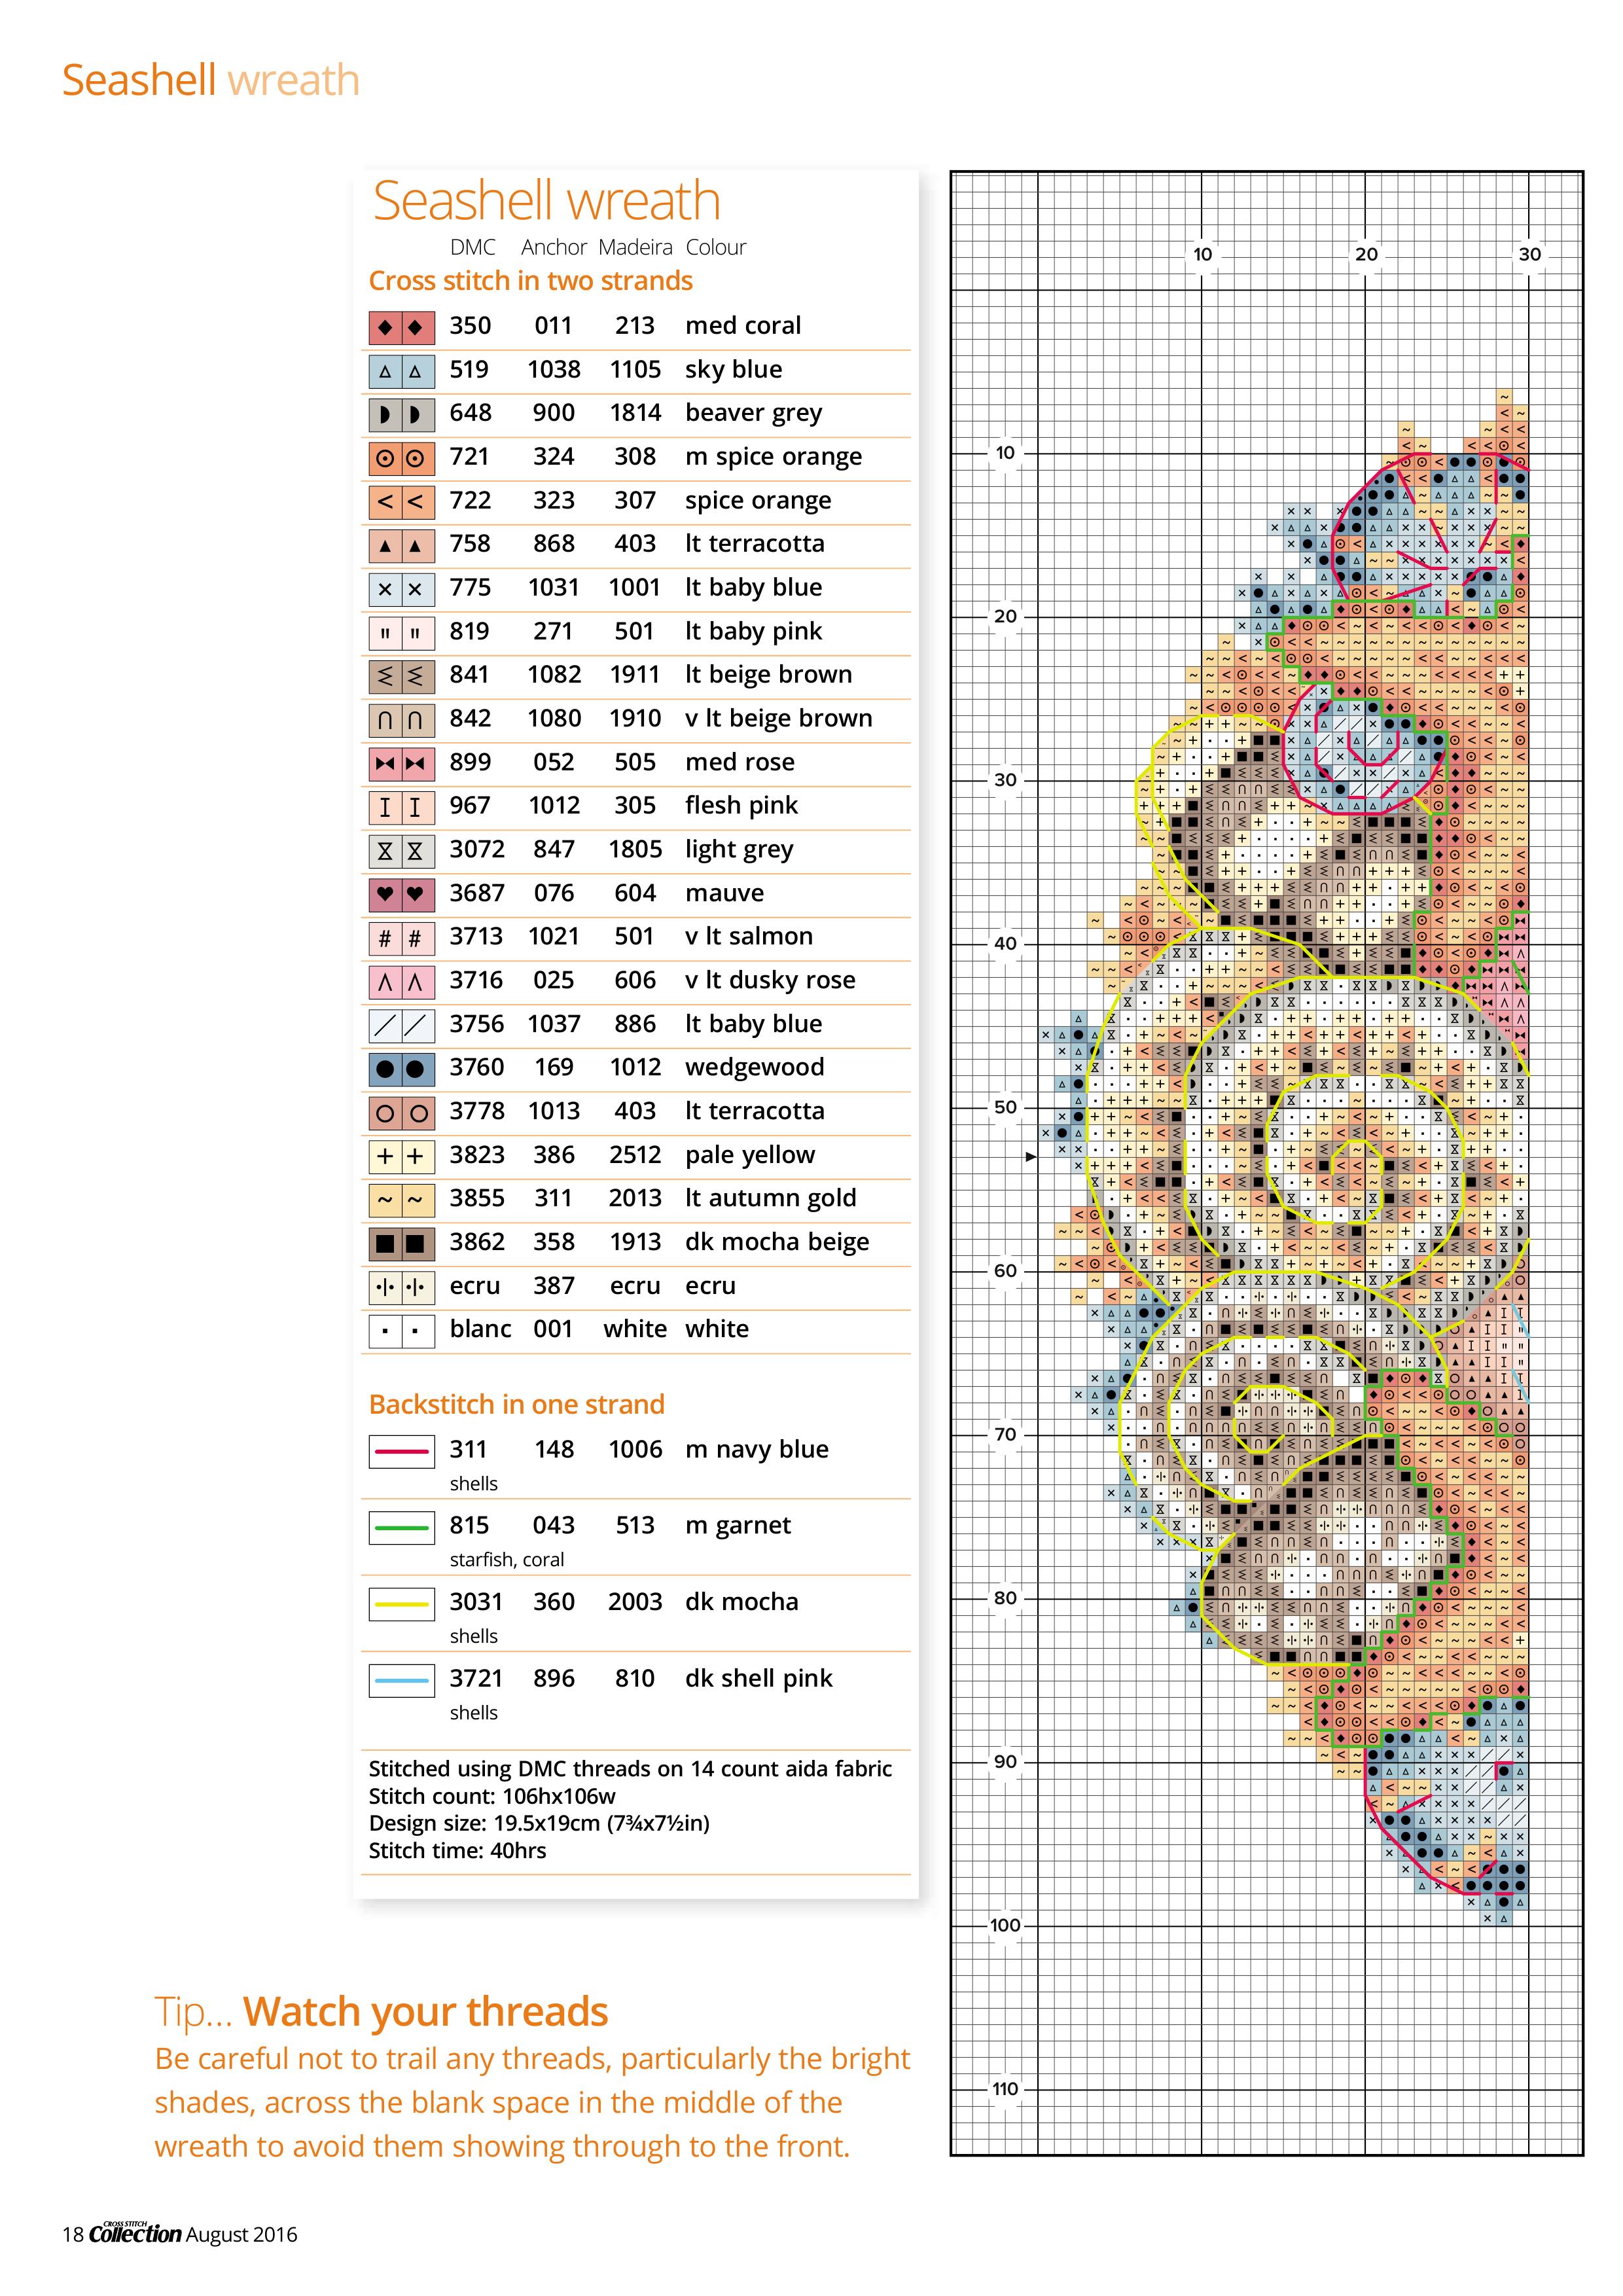 Cross Stitch Collection - August 2016 18